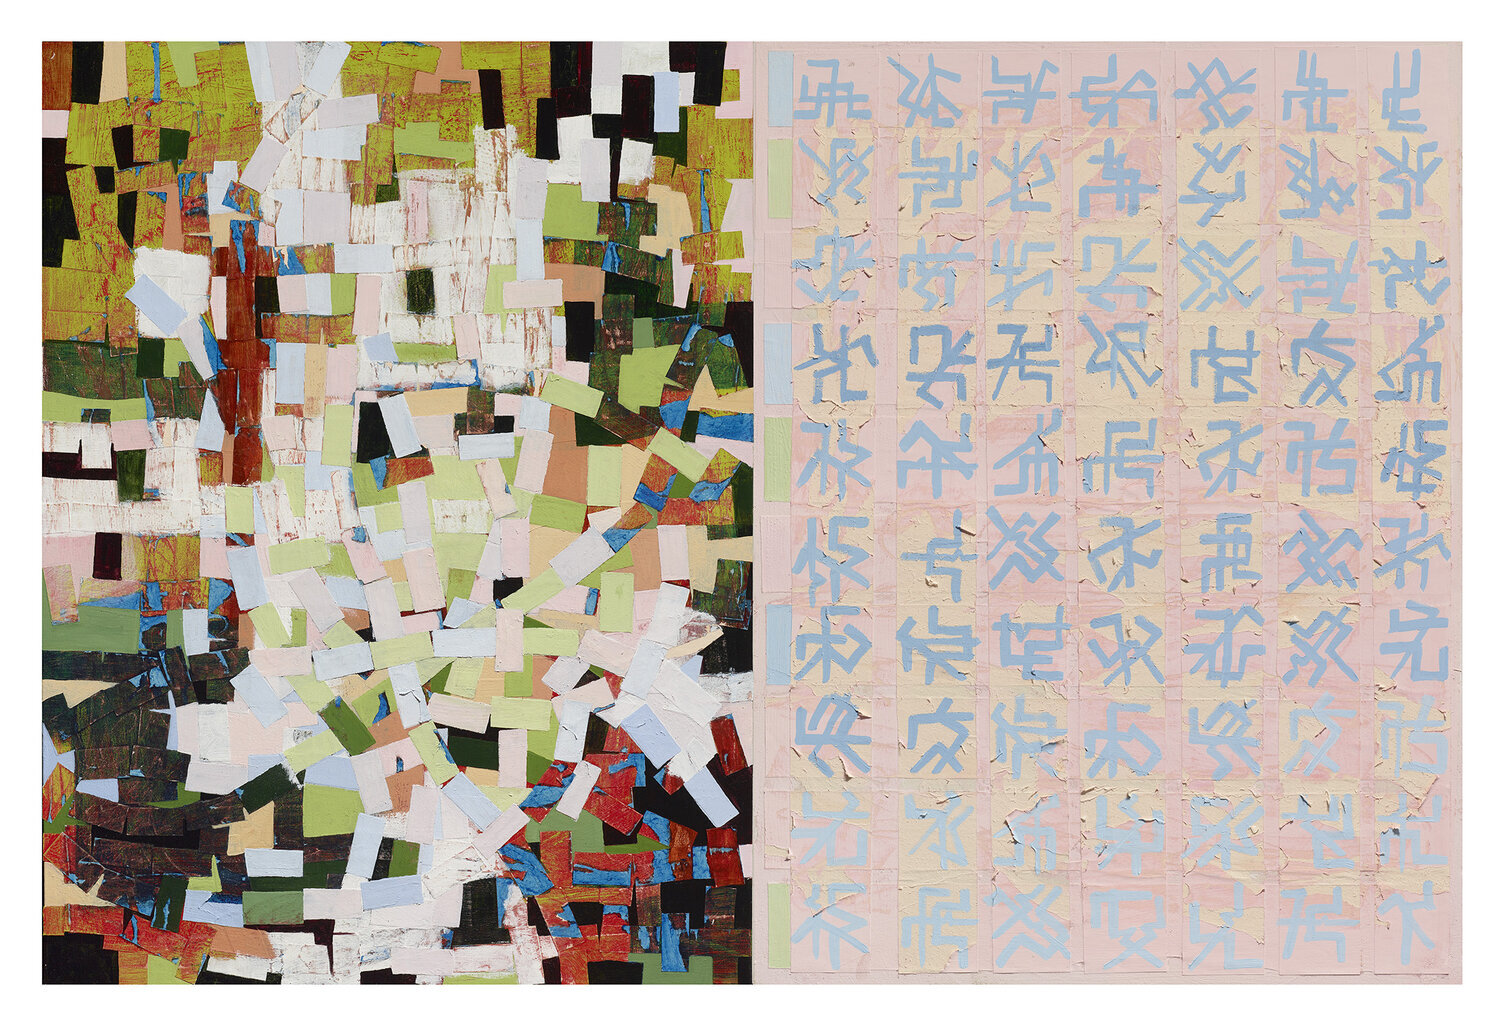  Rick Lowe,  Untitled , 2020, acrylic and paper collage on canvas (2 panels), 48 x 72 in., Loan Courtesy of the Artist &amp; Hiram Butler Gallery, Houston, TX 